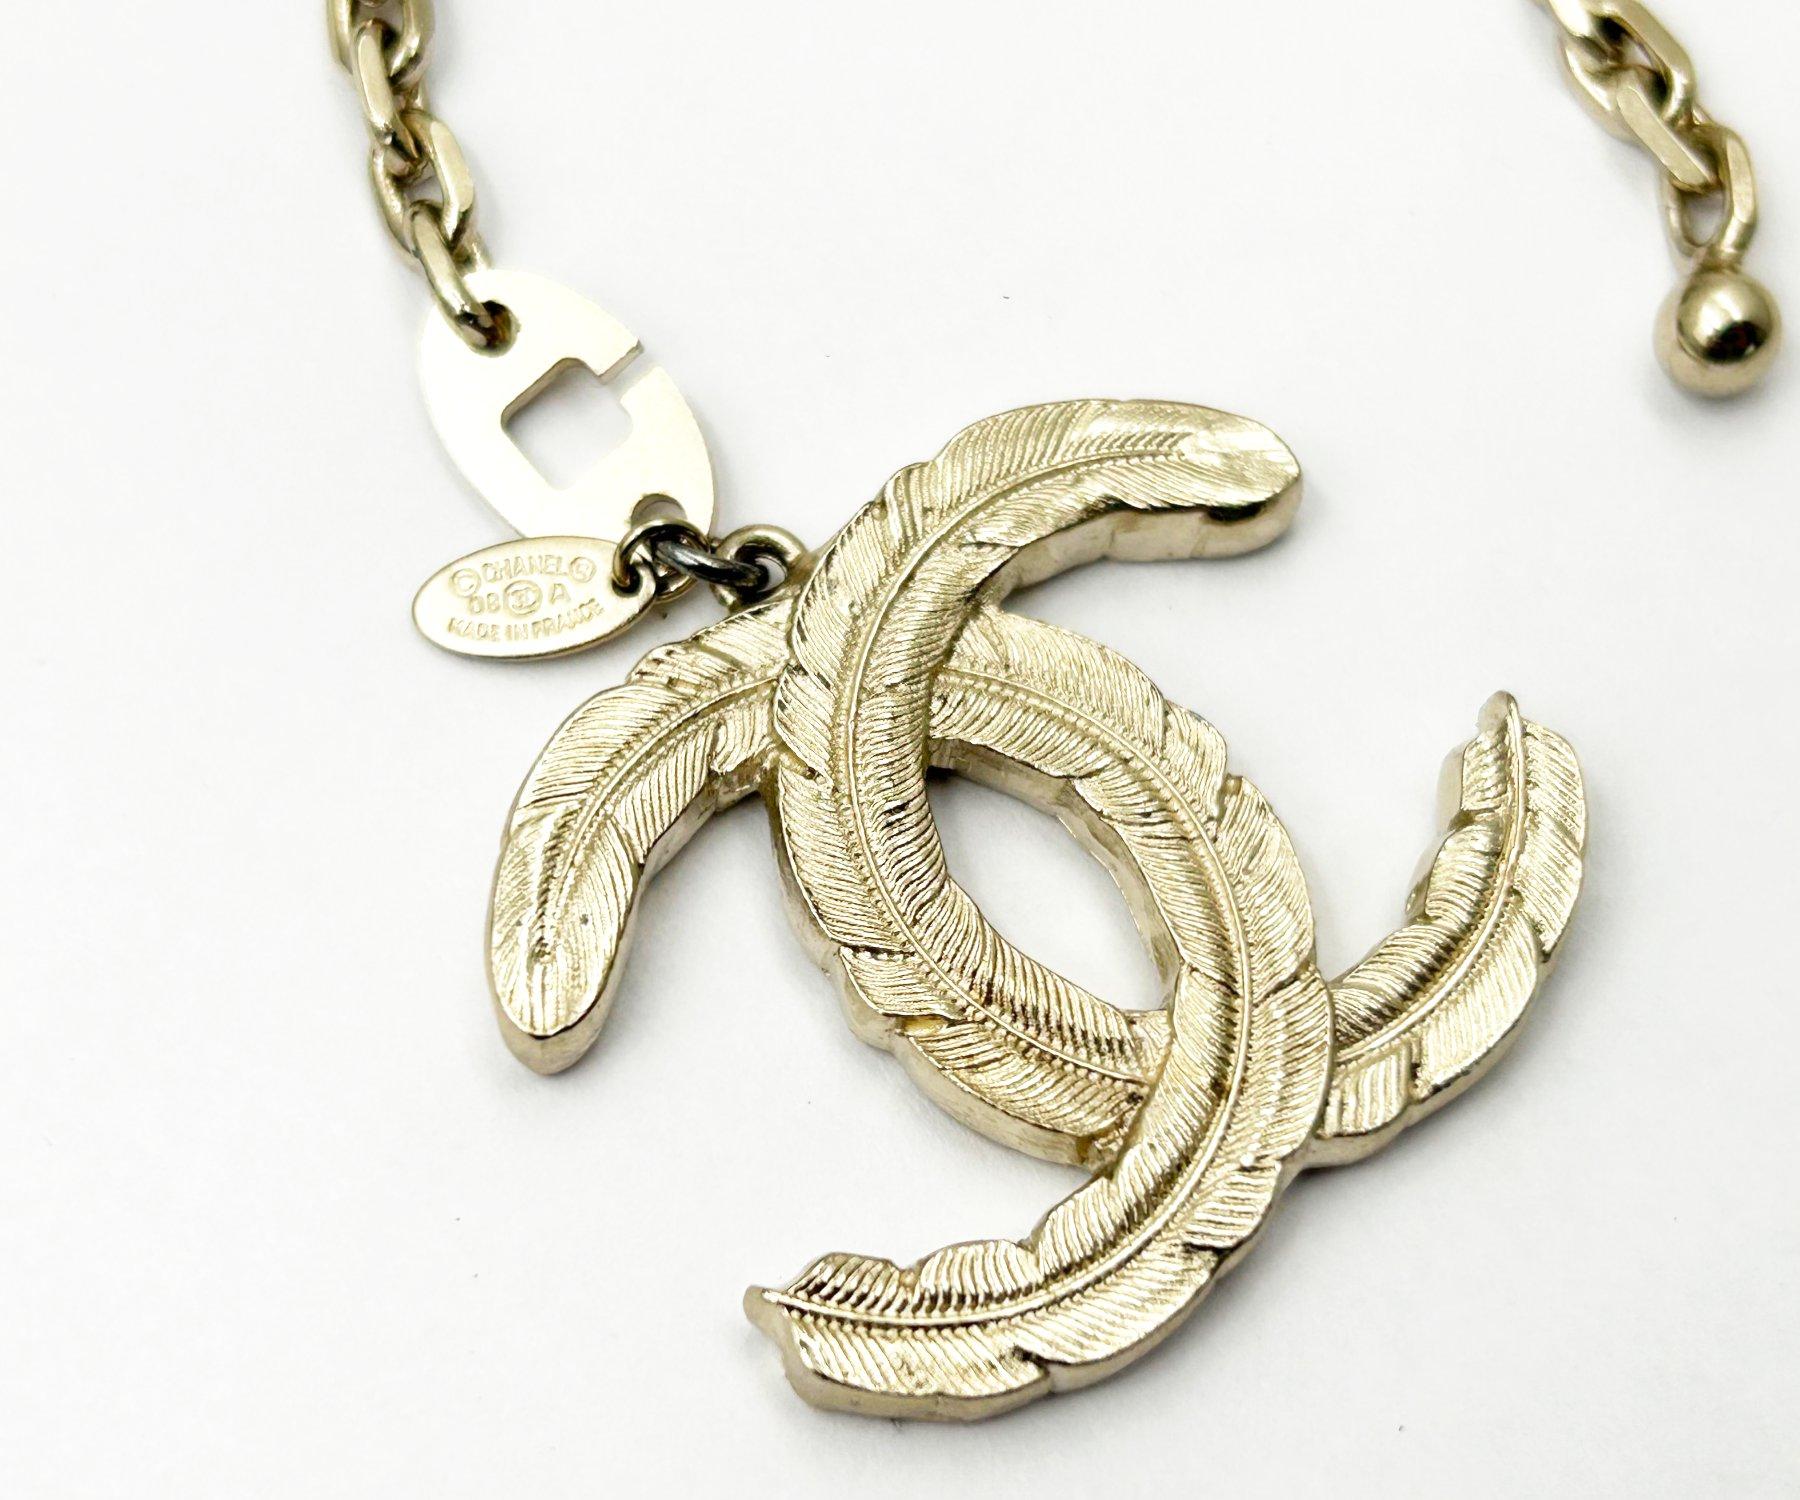 Chanel Light Gold CC Feather Large Pendant Key Chain Key Charm In Excellent Condition For Sale In Pasadena, CA